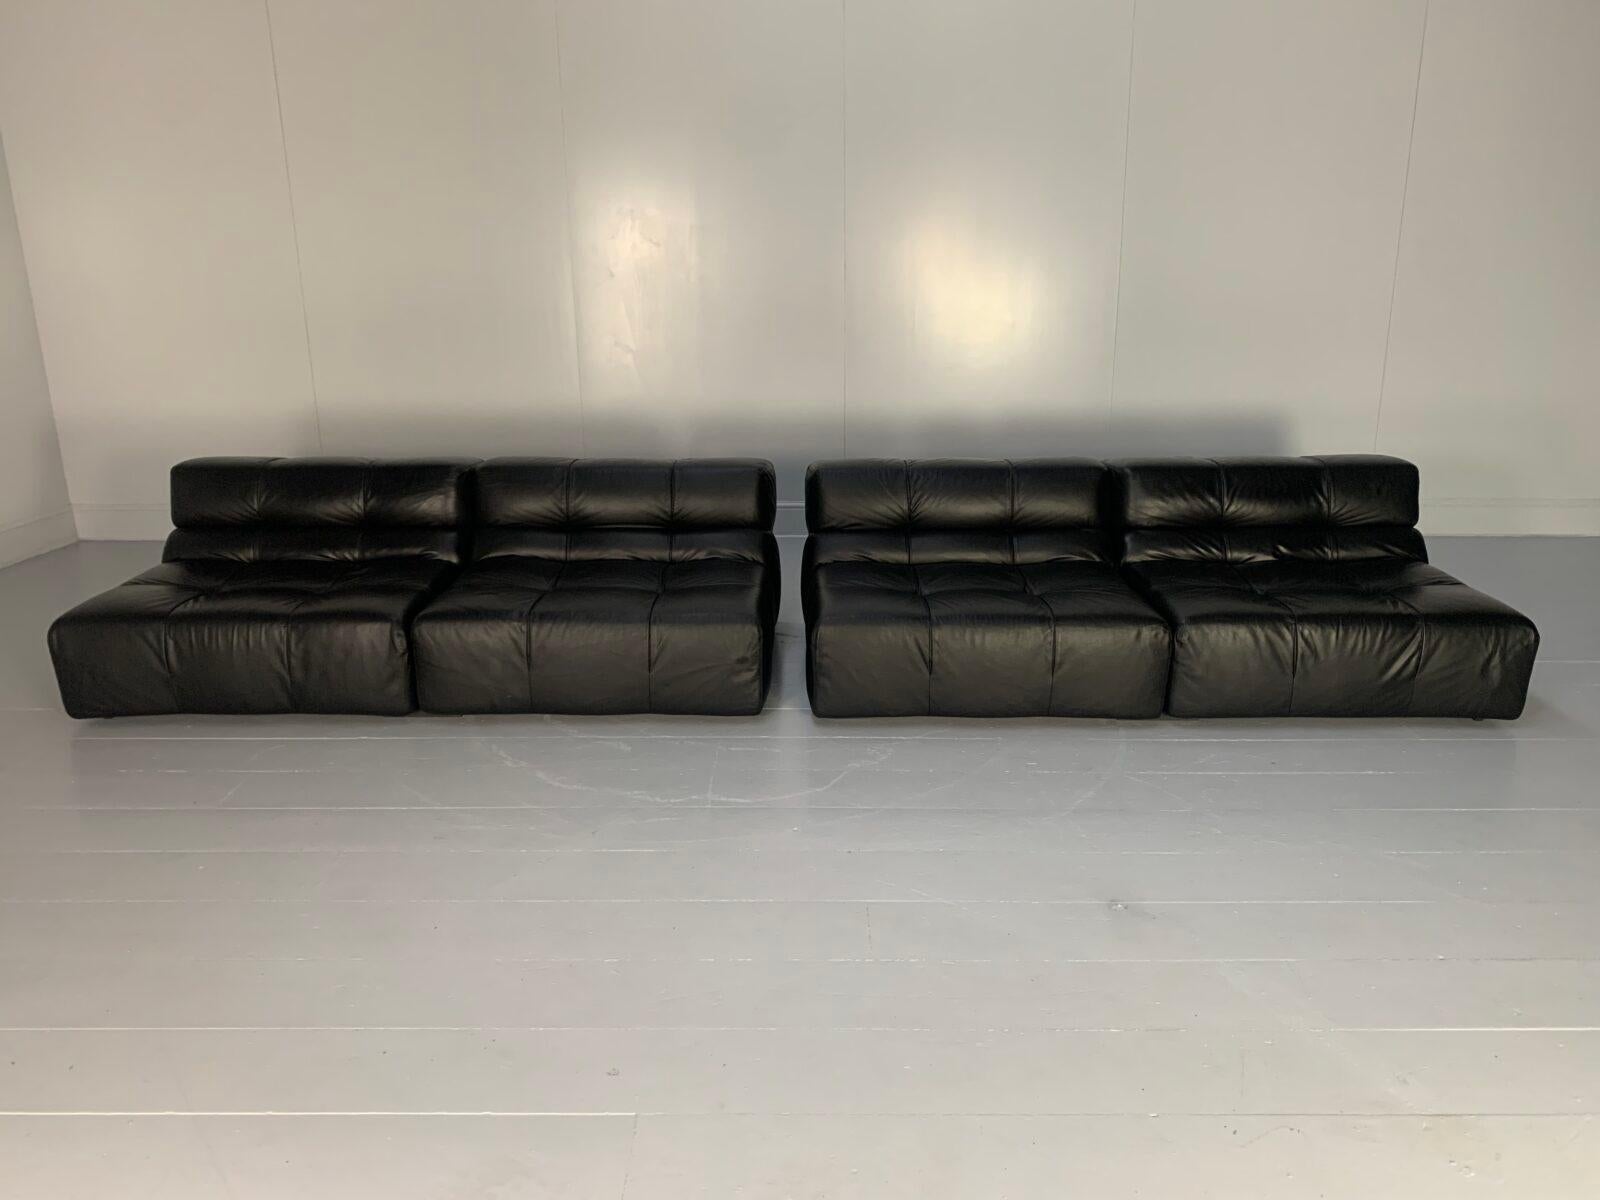 On offer on this occasion is superb, immaculately-presented example of an icon of contemporary seating-design, it being a superb identical pair of 